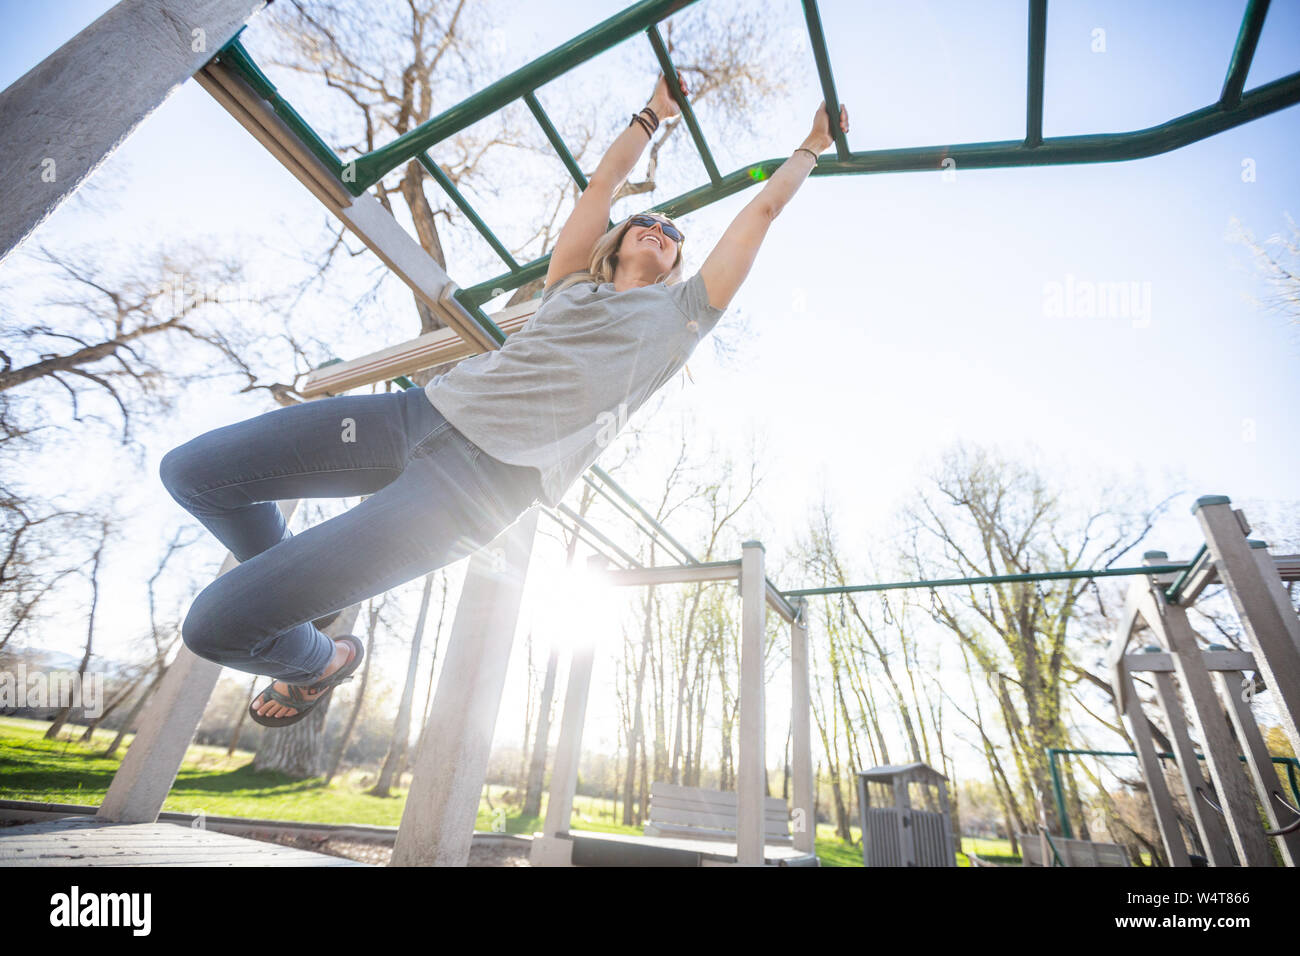 Woman playing on monkey bars in a playground, United States Stock Photo